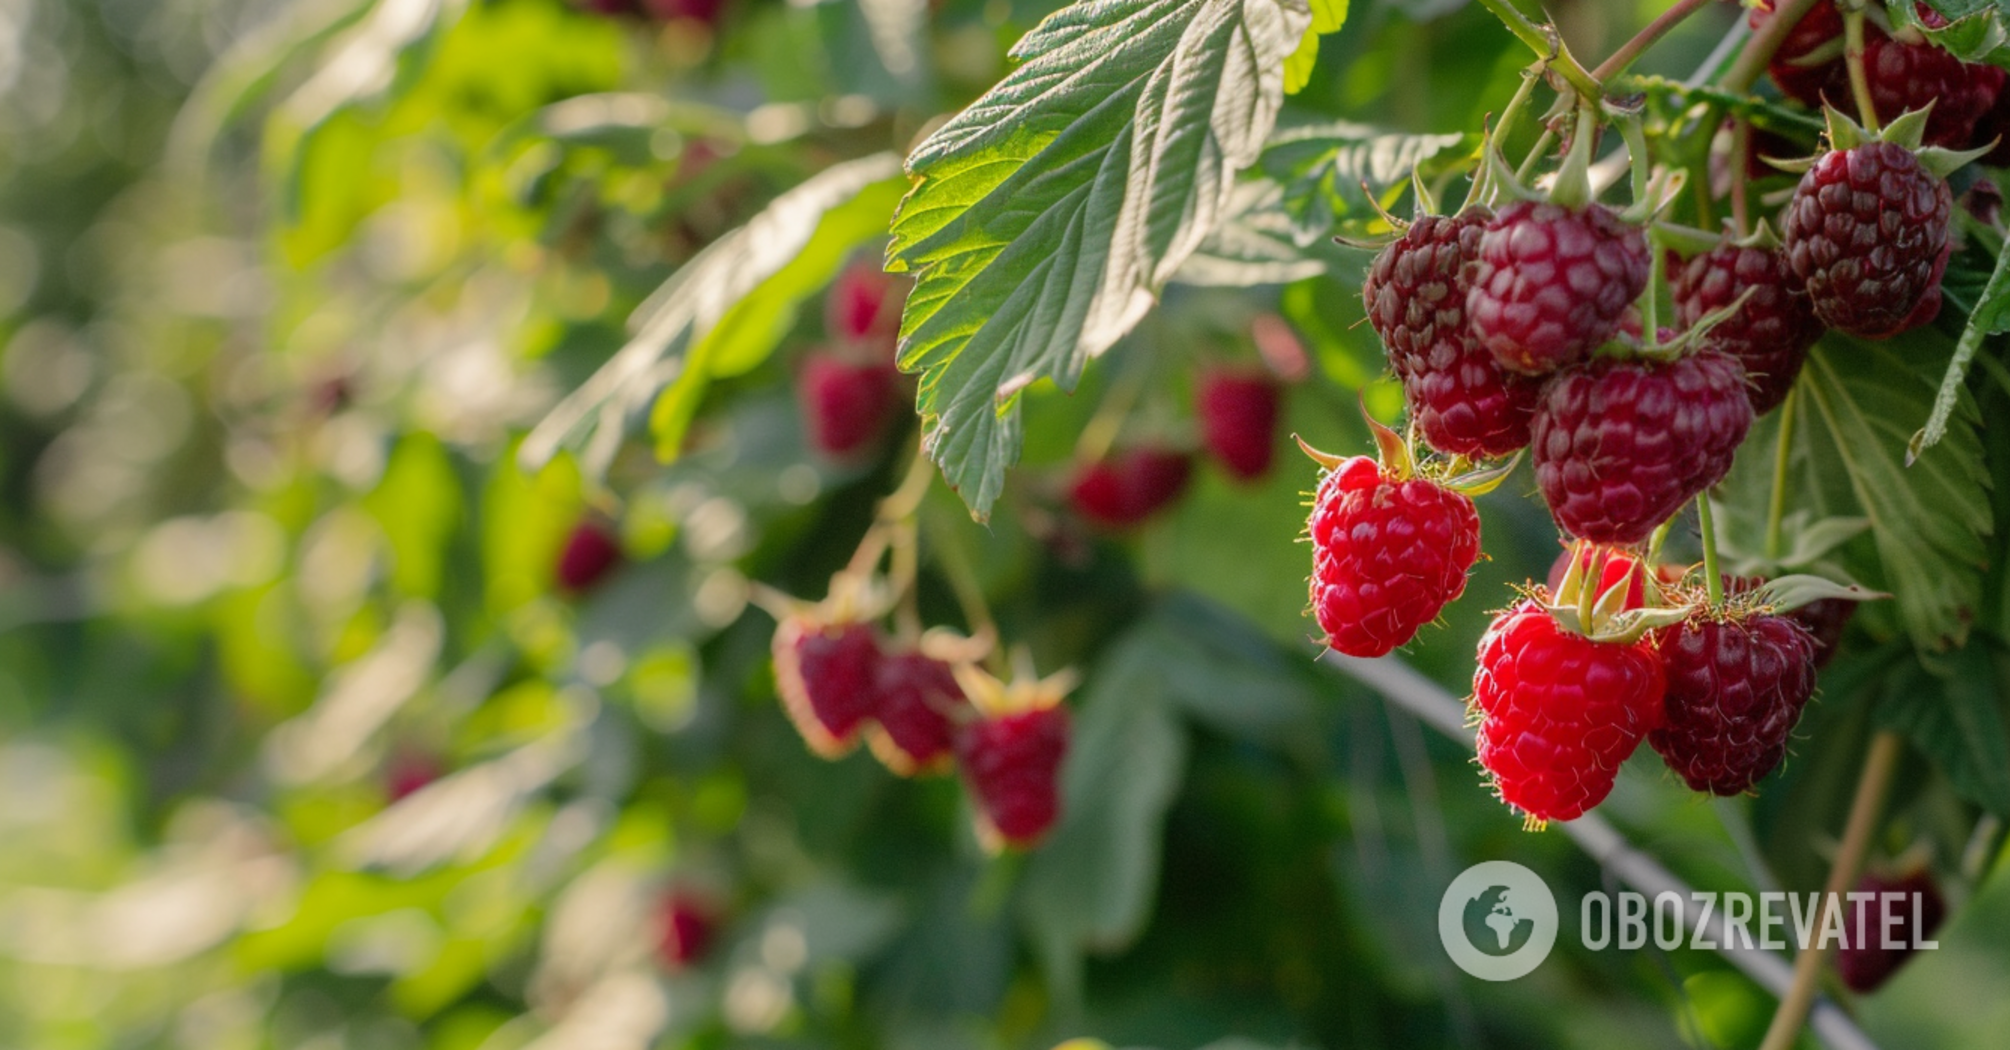 How to grow a raspberry bush from one berry: an unusual way